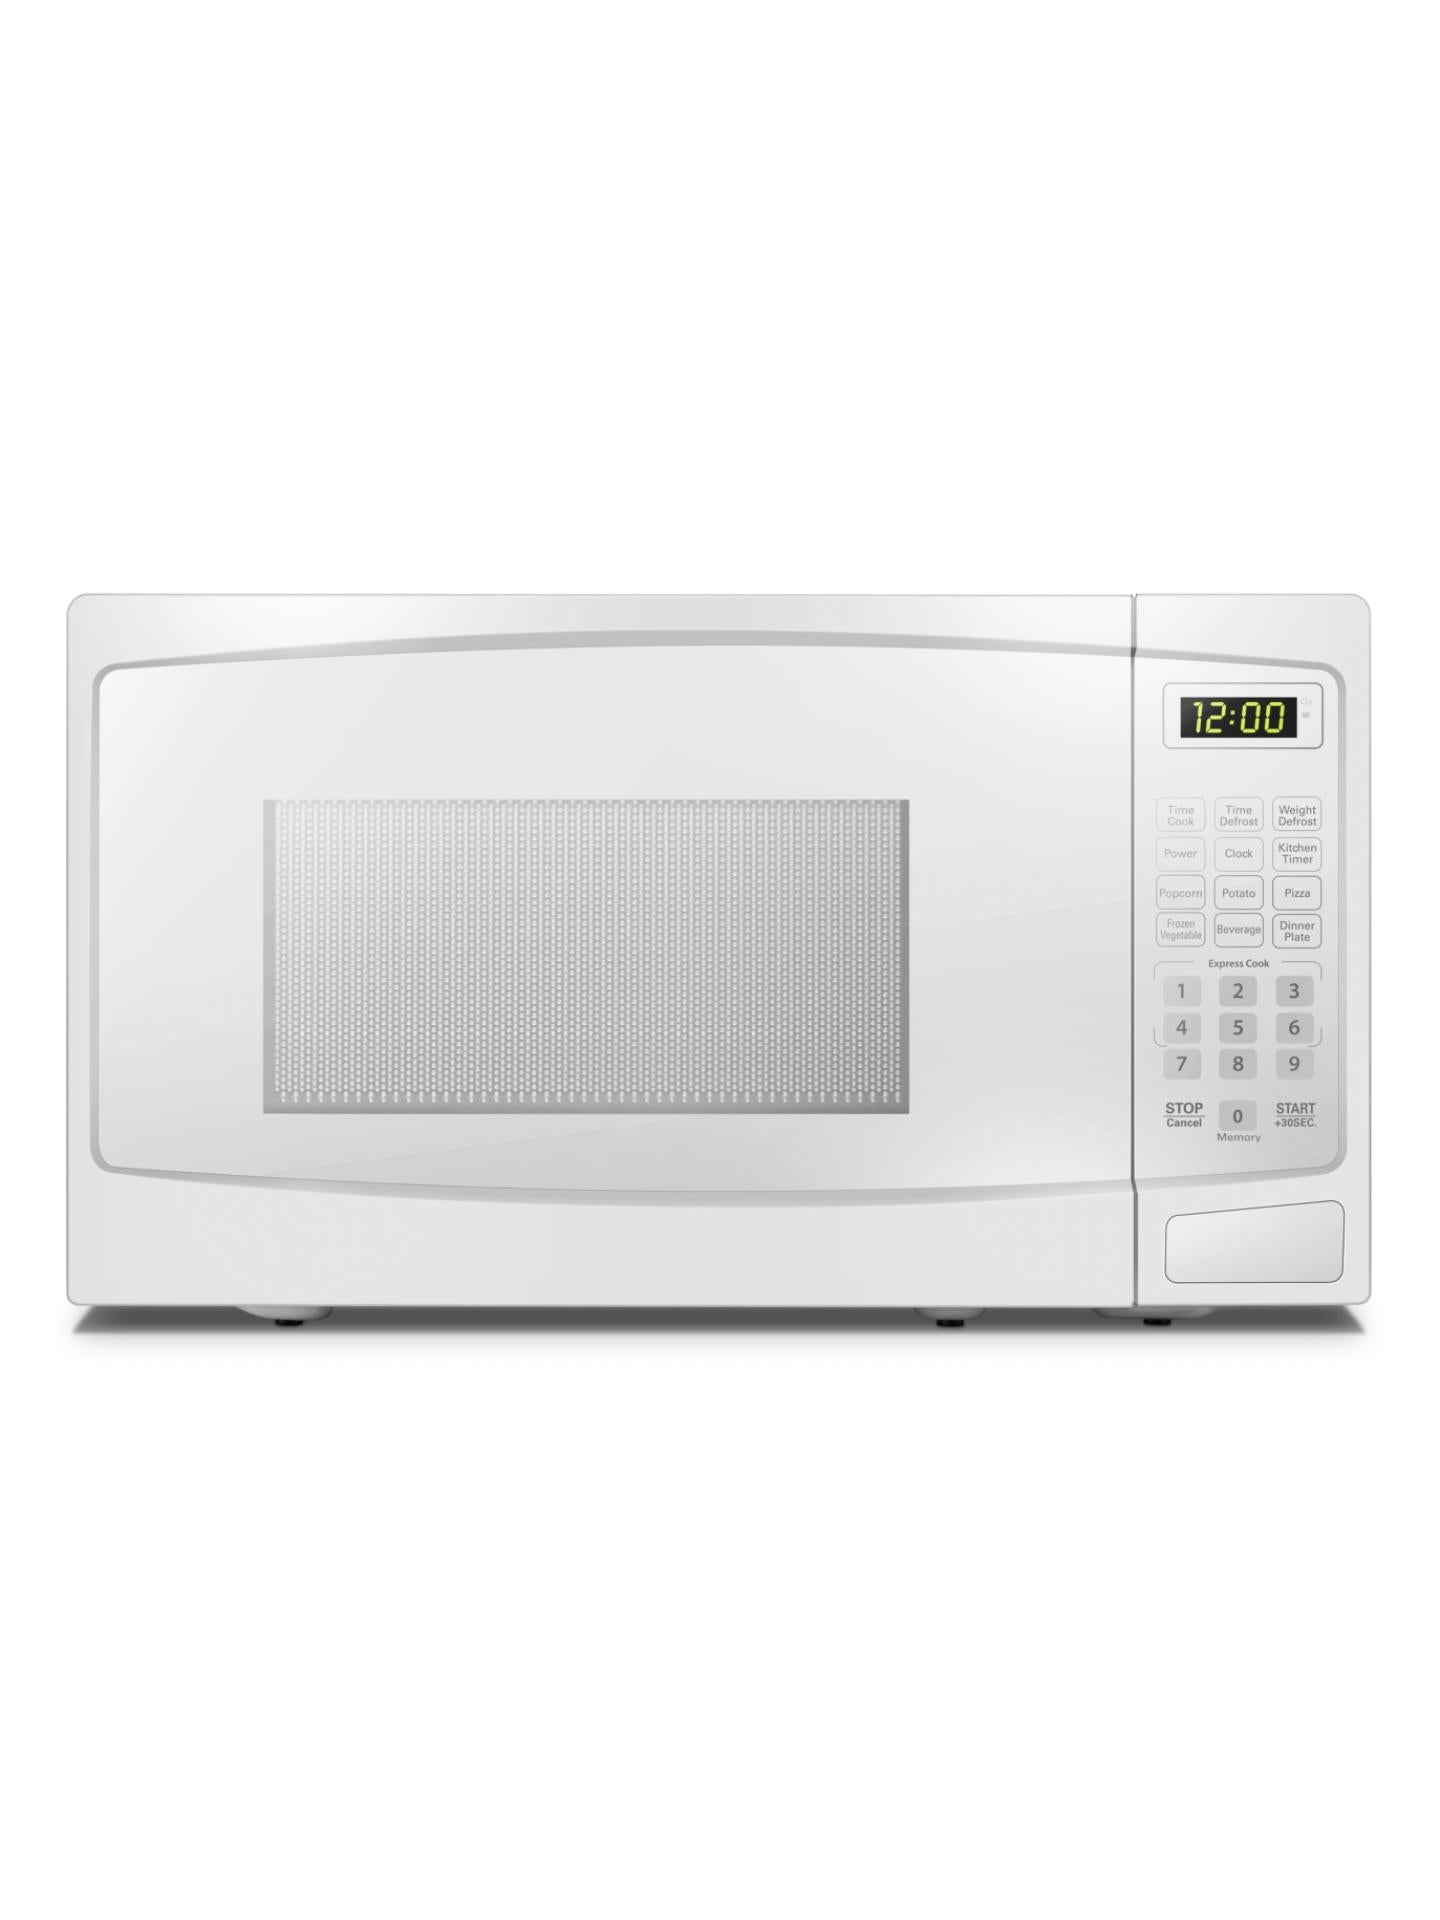 Danby 0.9 cu. ft. Countertop Microwave in White